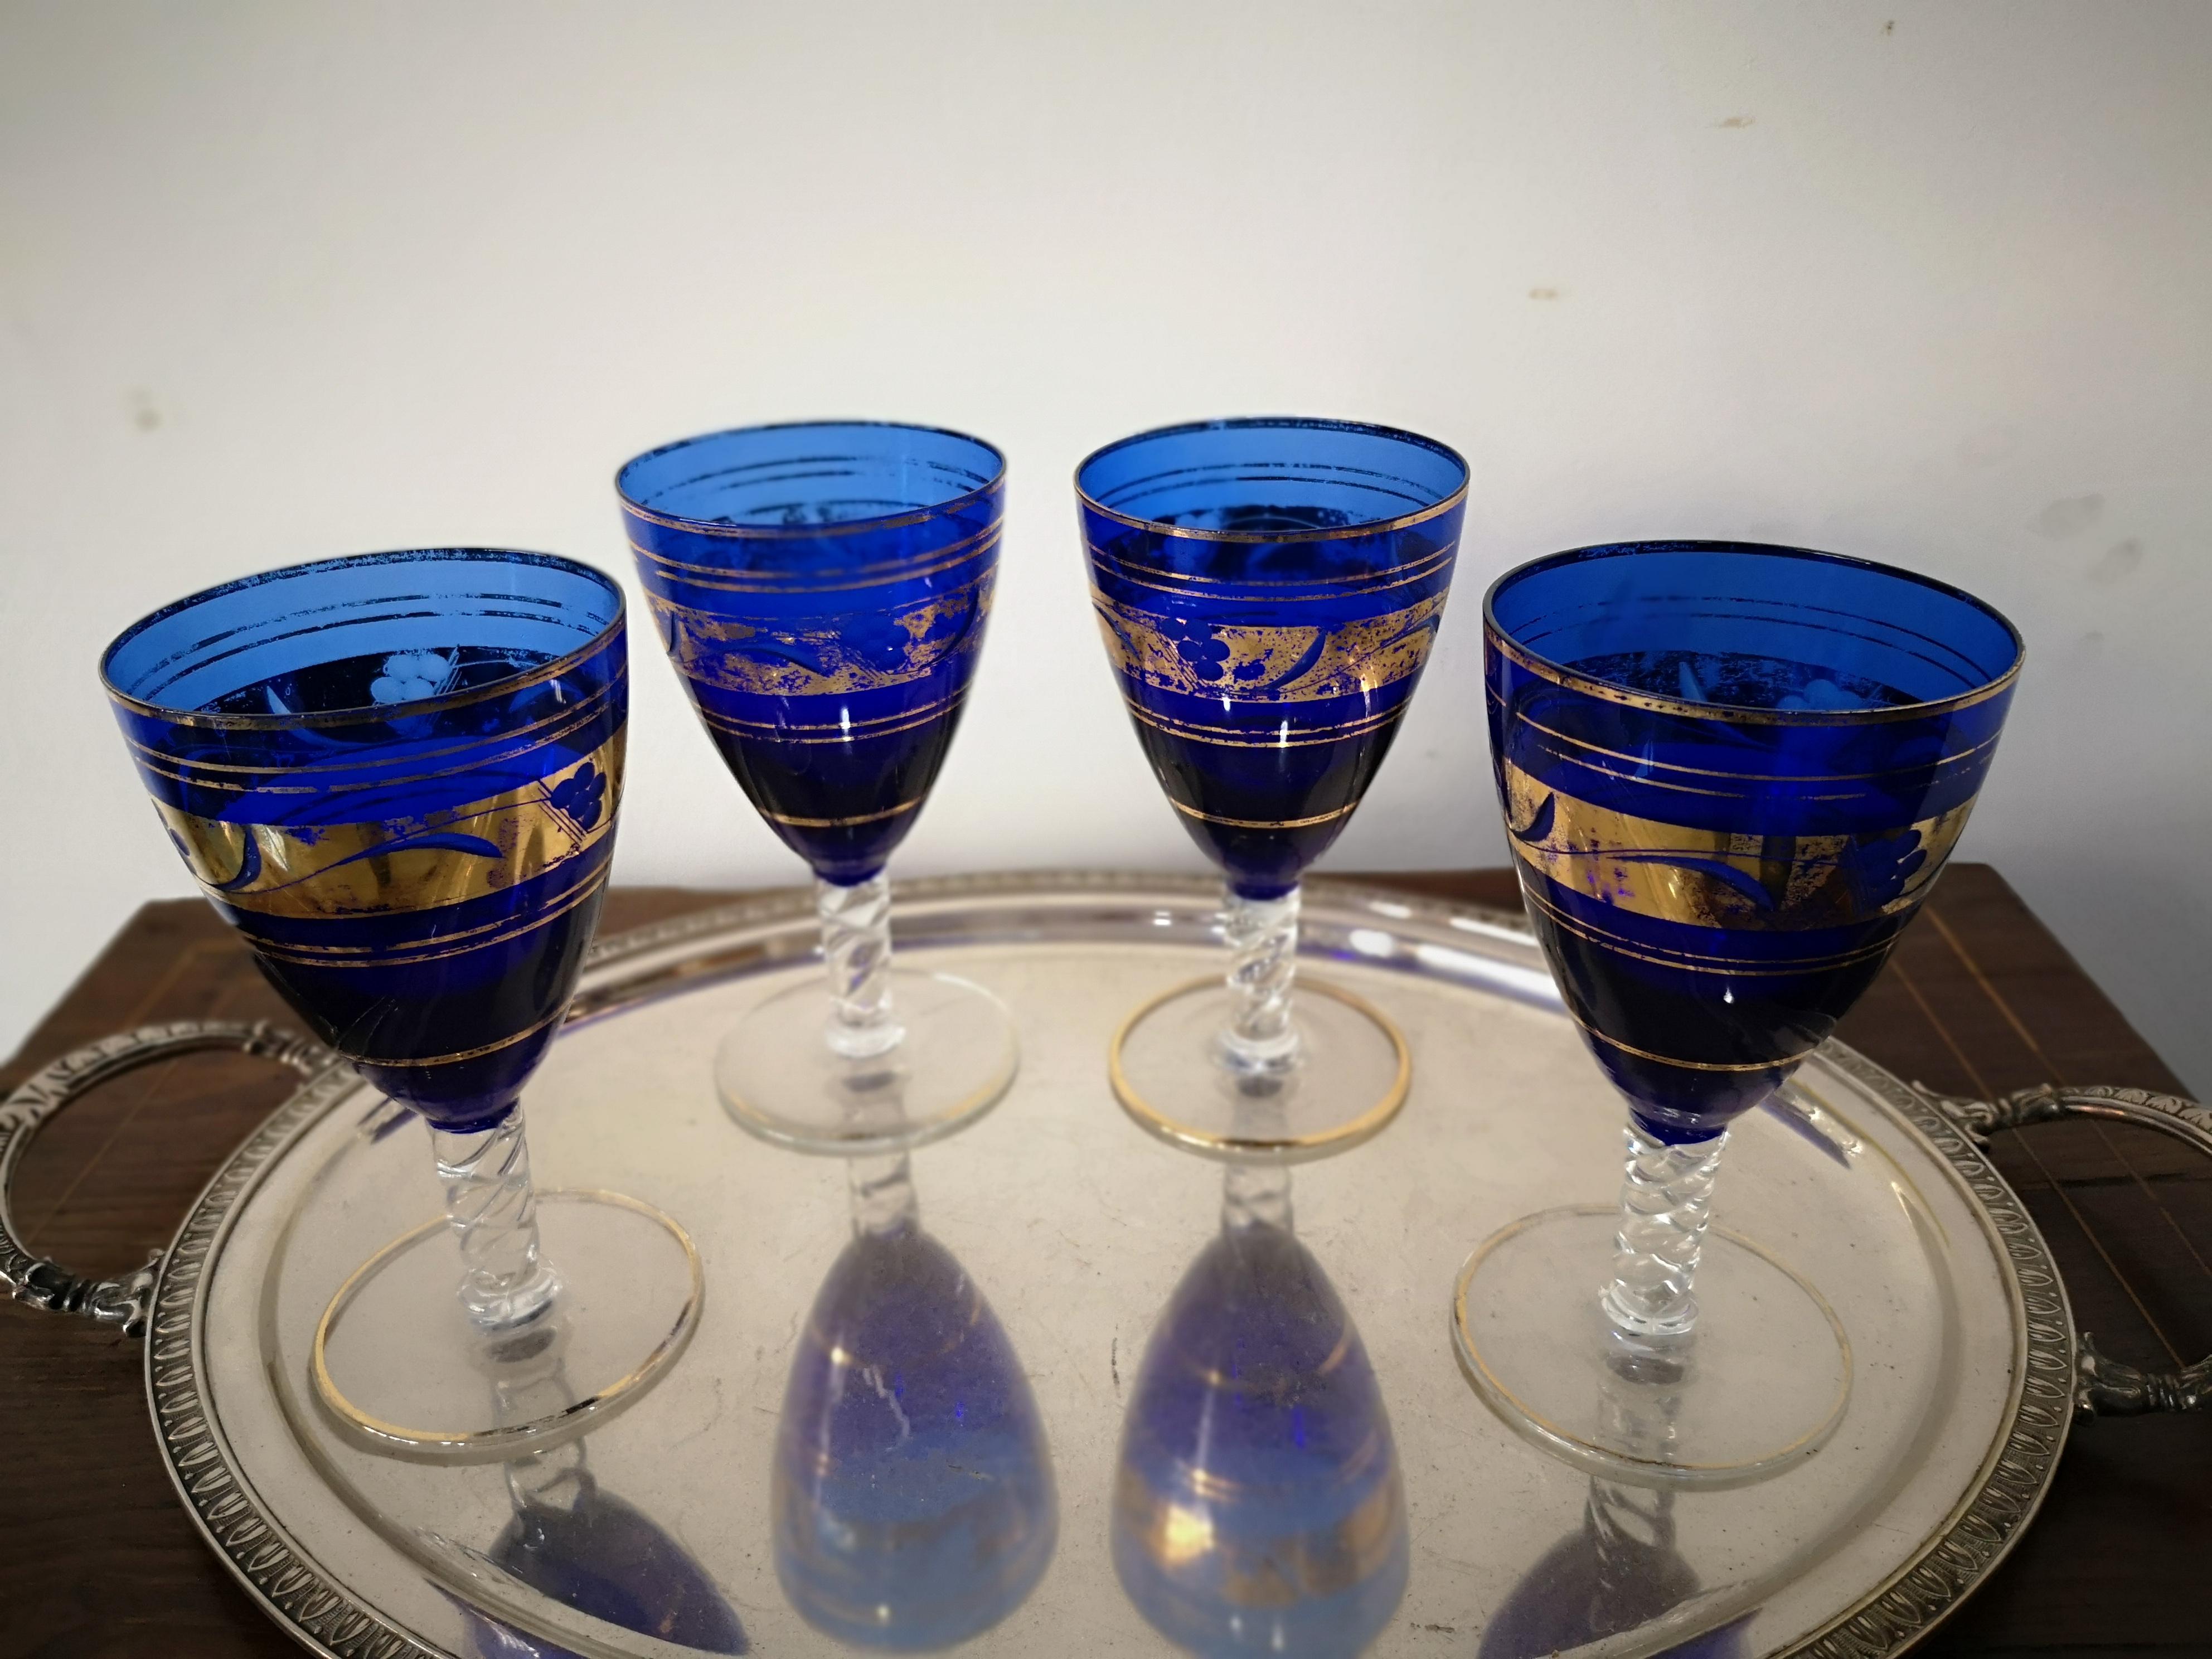 Murano glass drinking glass service with cobalt blue carafe and pure gold trim, mid-19th century. In very good condition consistent with the wear and tear of time. The pitcher is 26 cm high and top width 16 cm. The glasses are 16 cm high and 9 cm